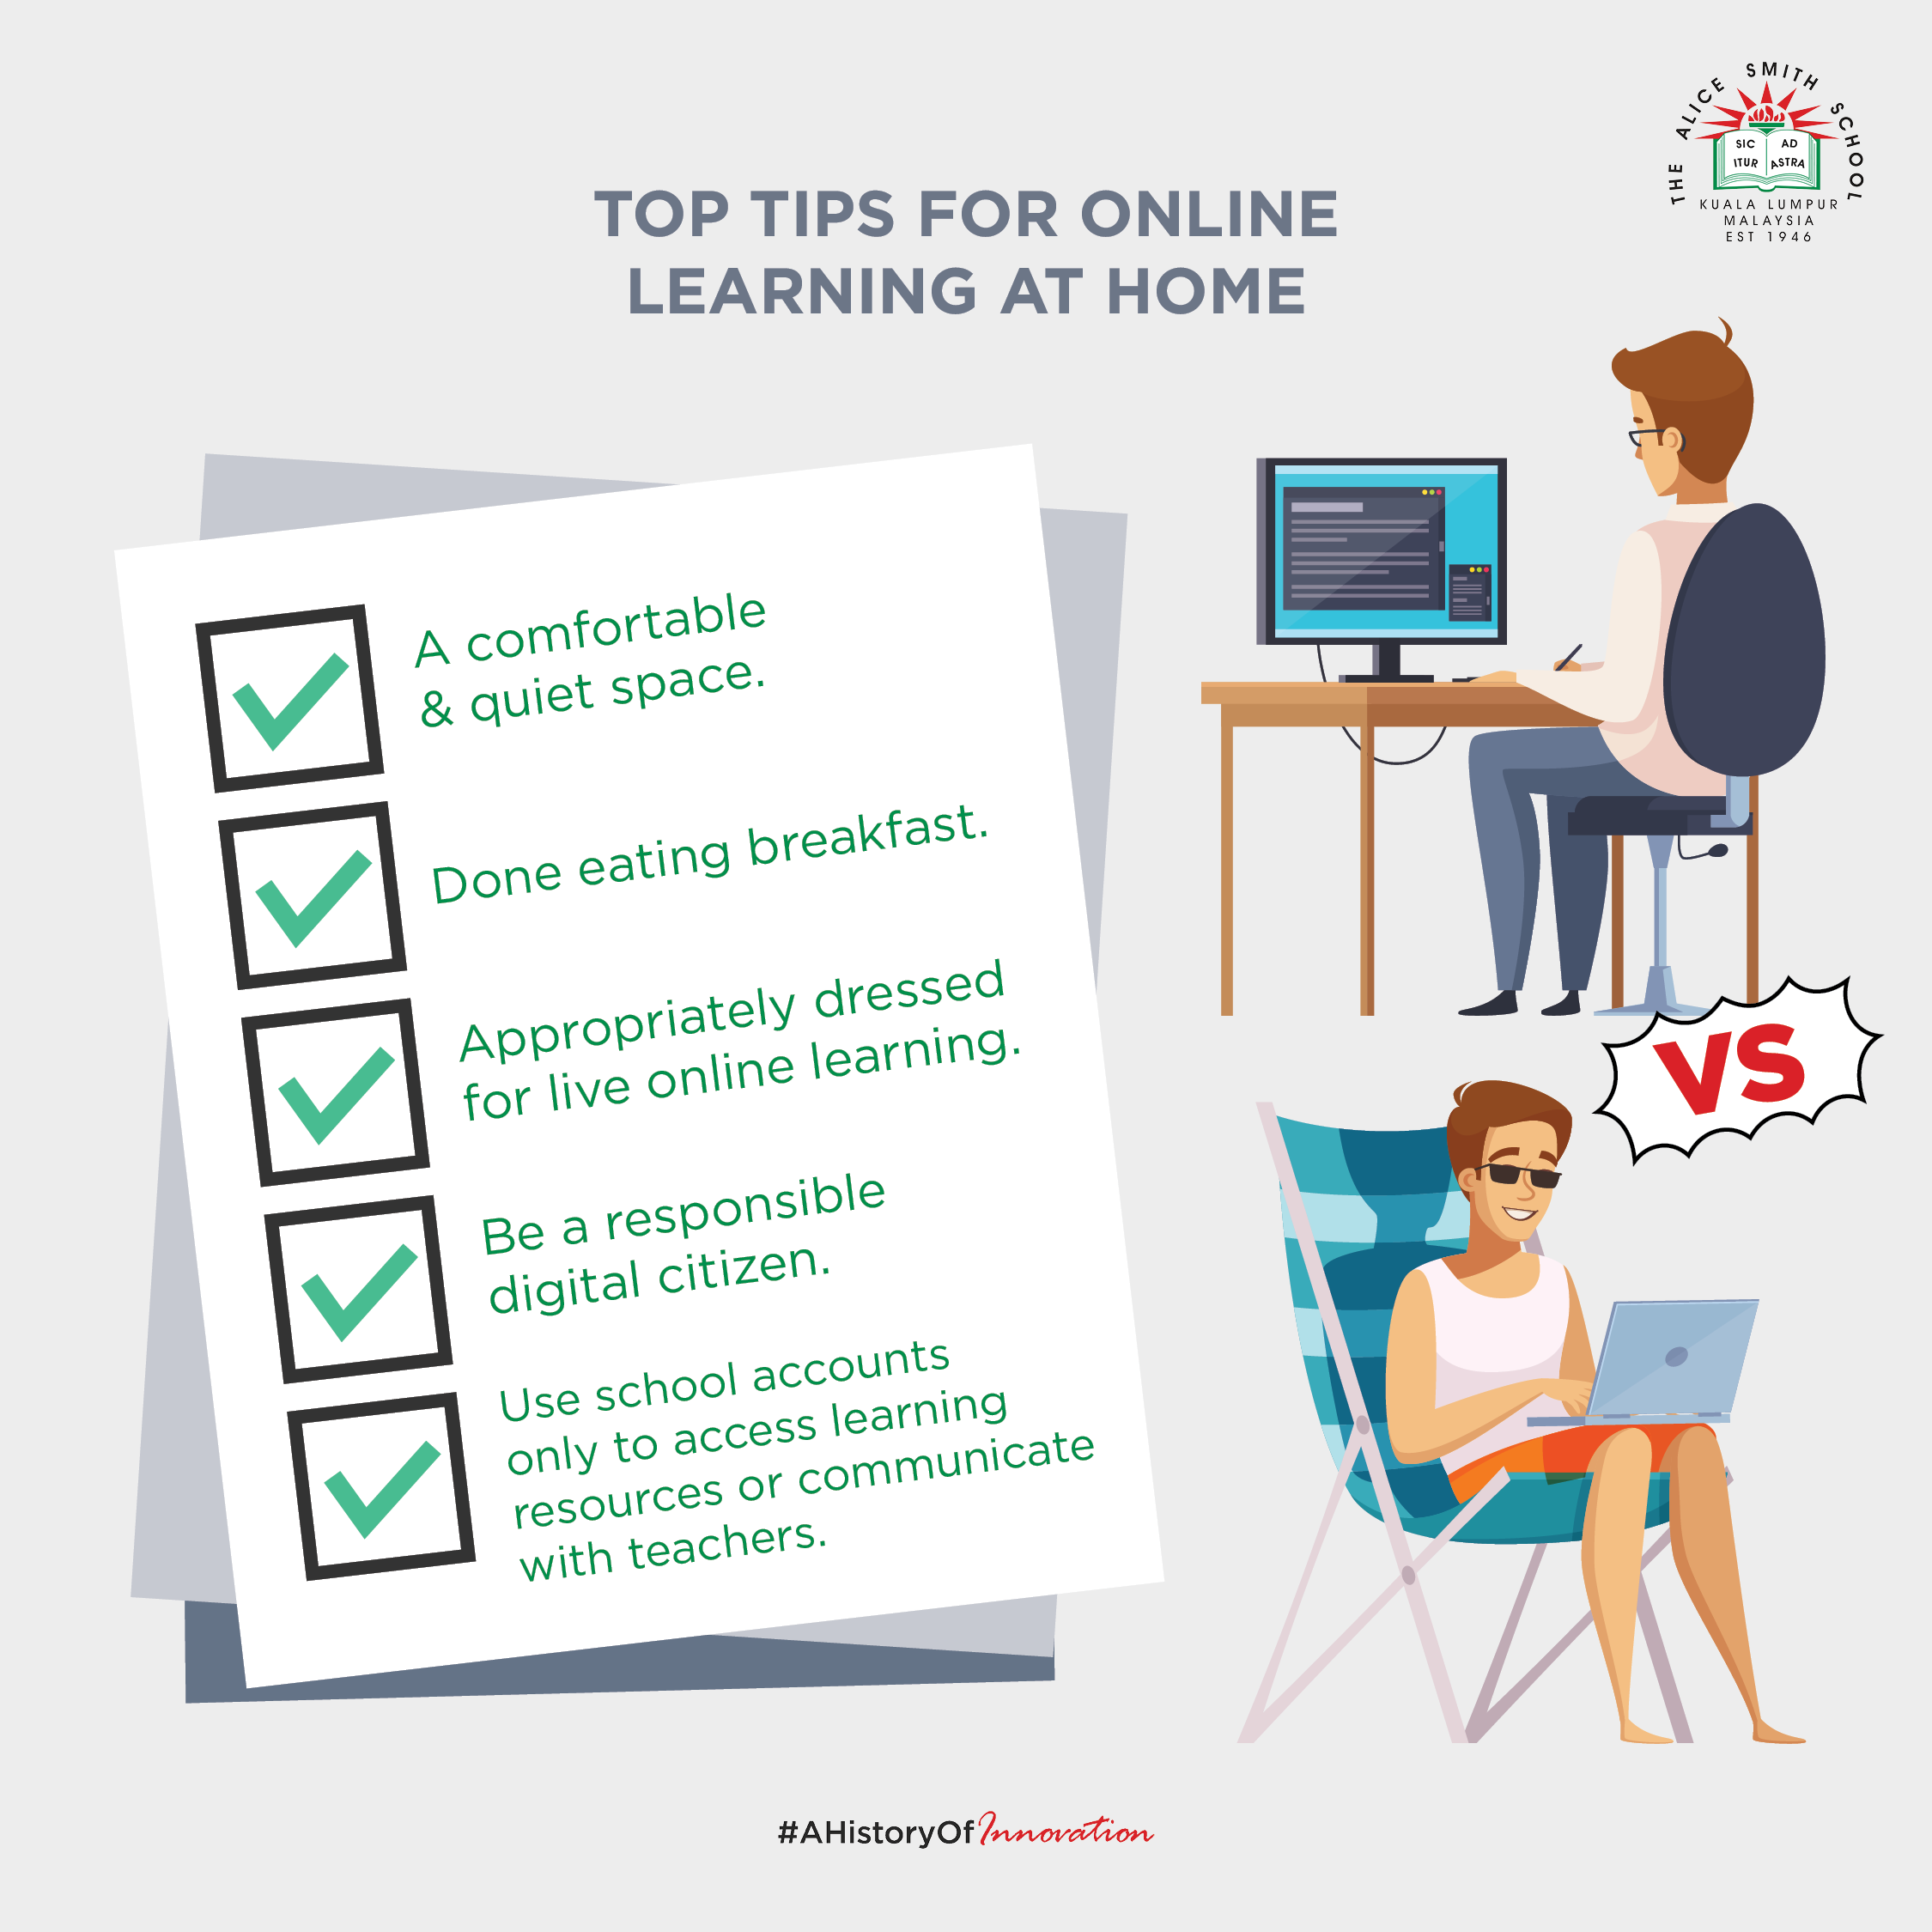 How to Create a Positive Virtual Learning Environment at Home